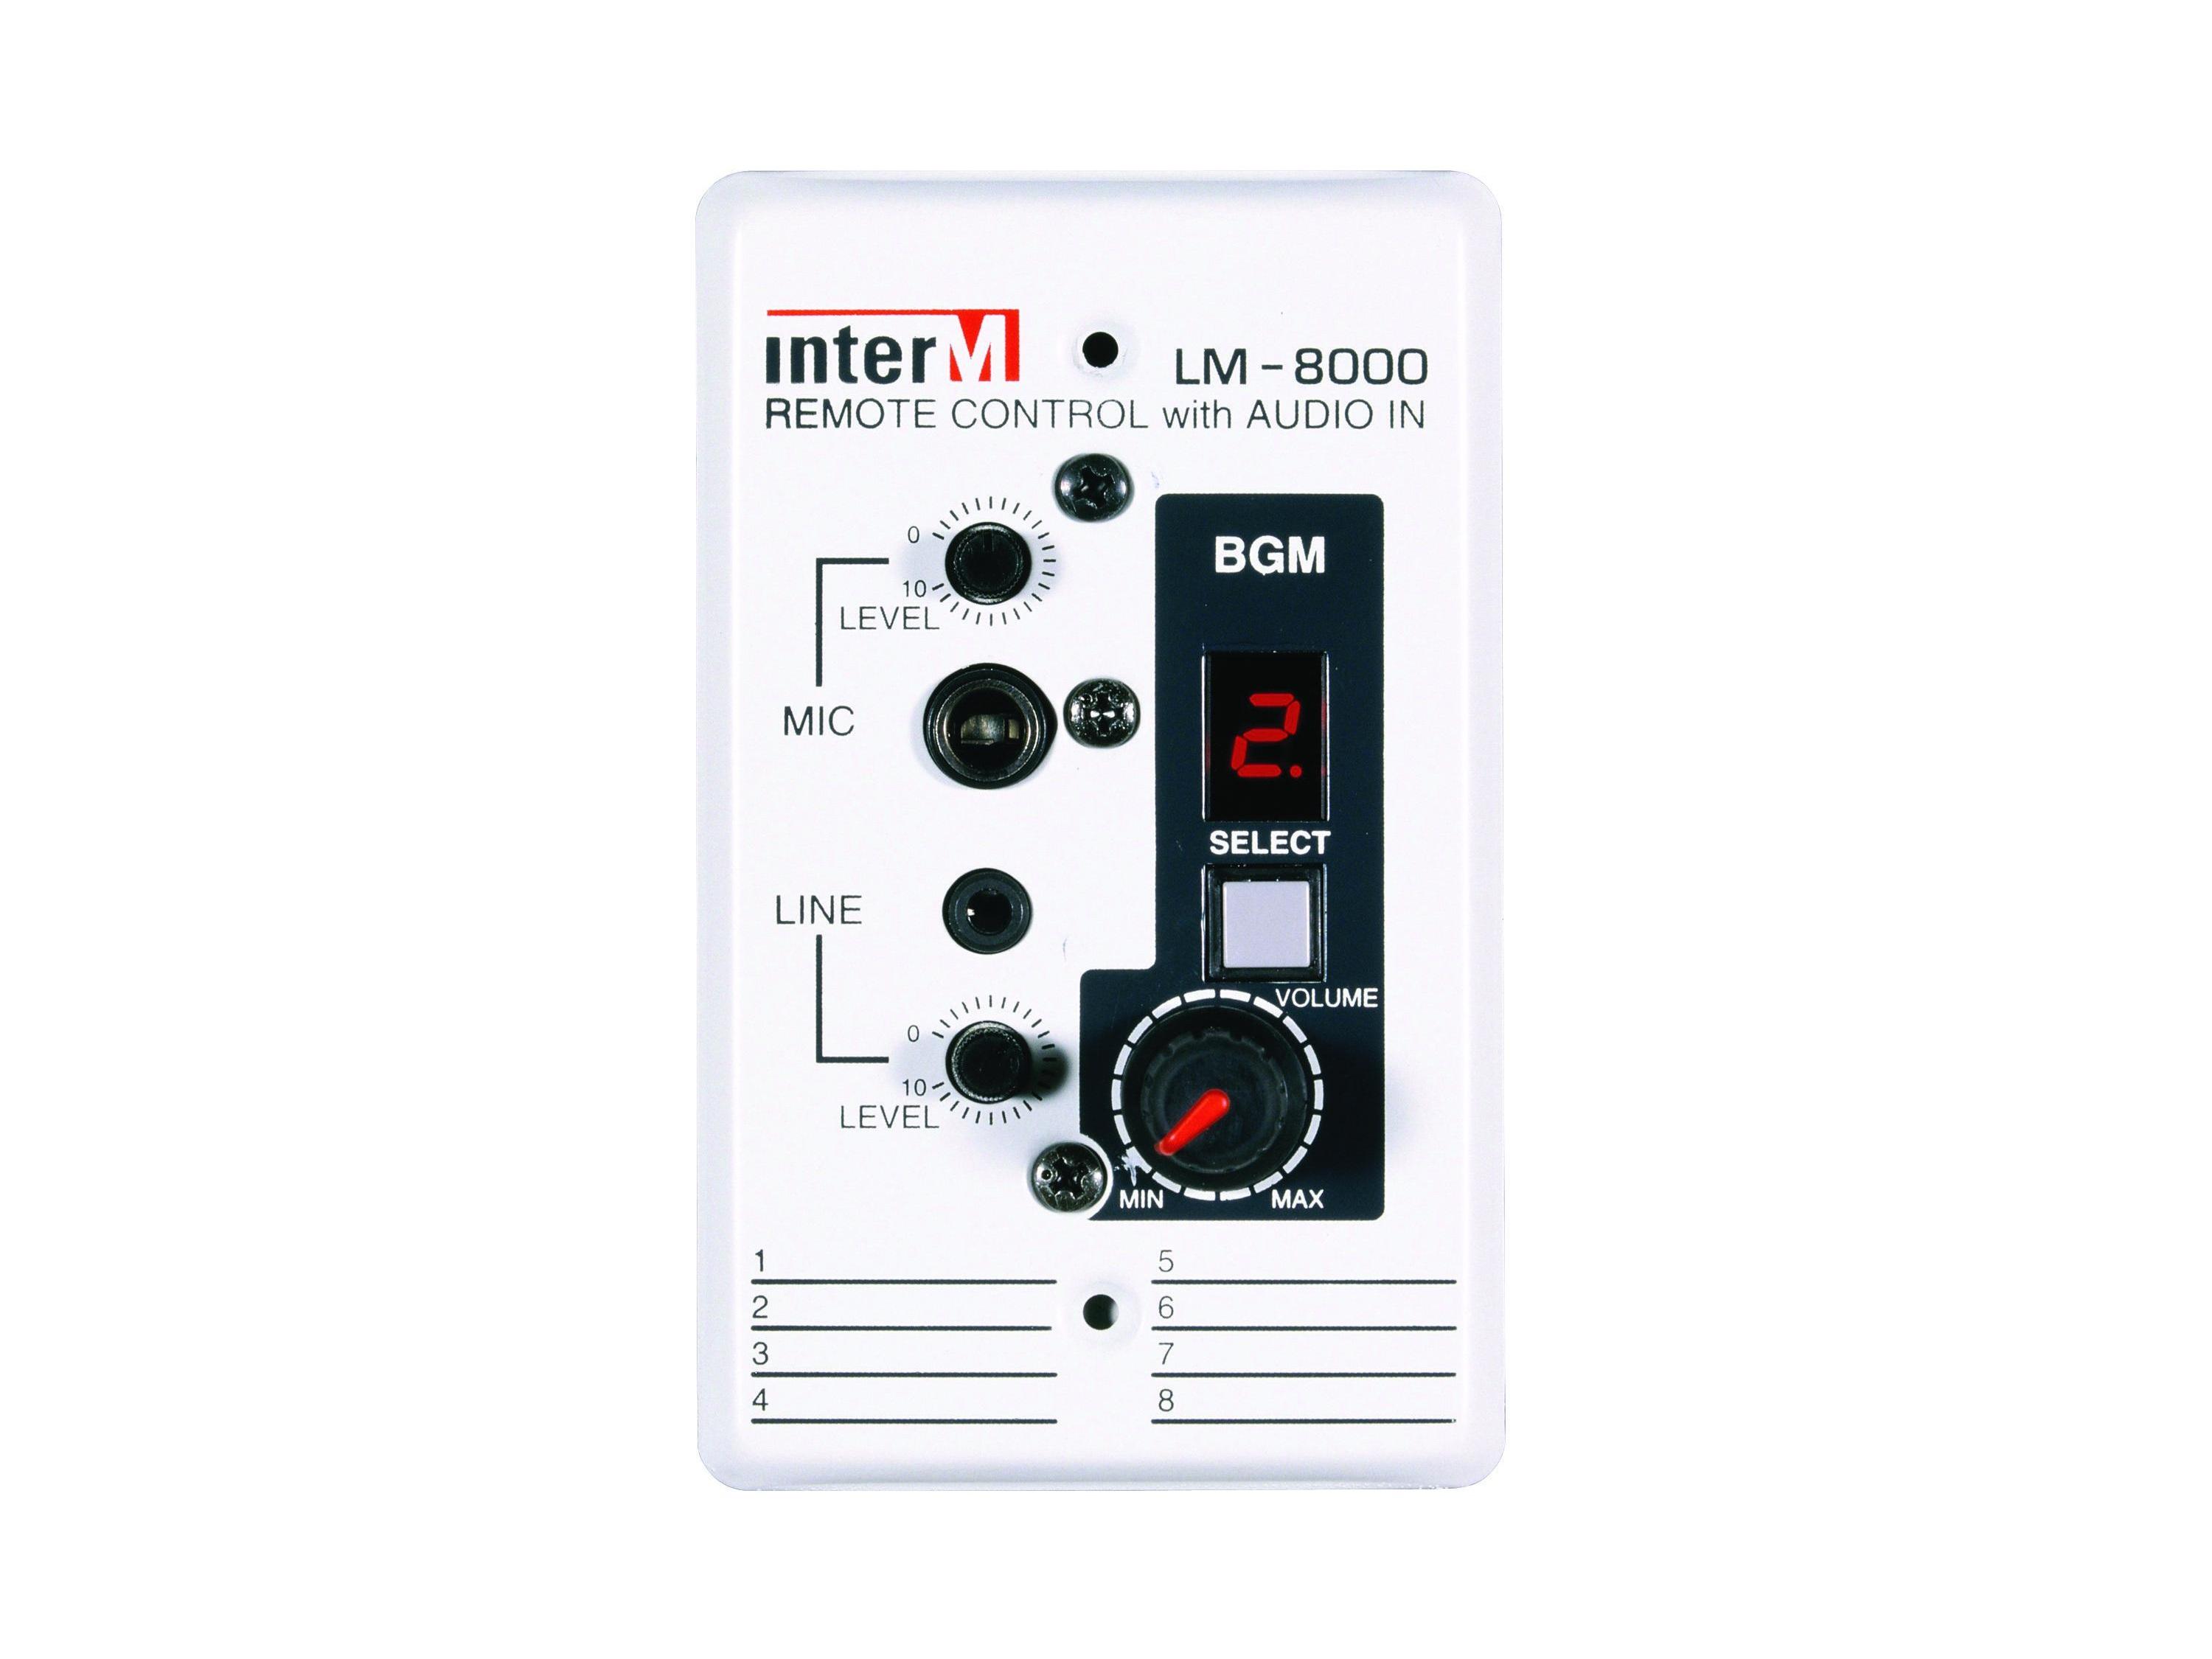 LM-8000 Wall Mount Remote Control for PX-8000 by Inter-M